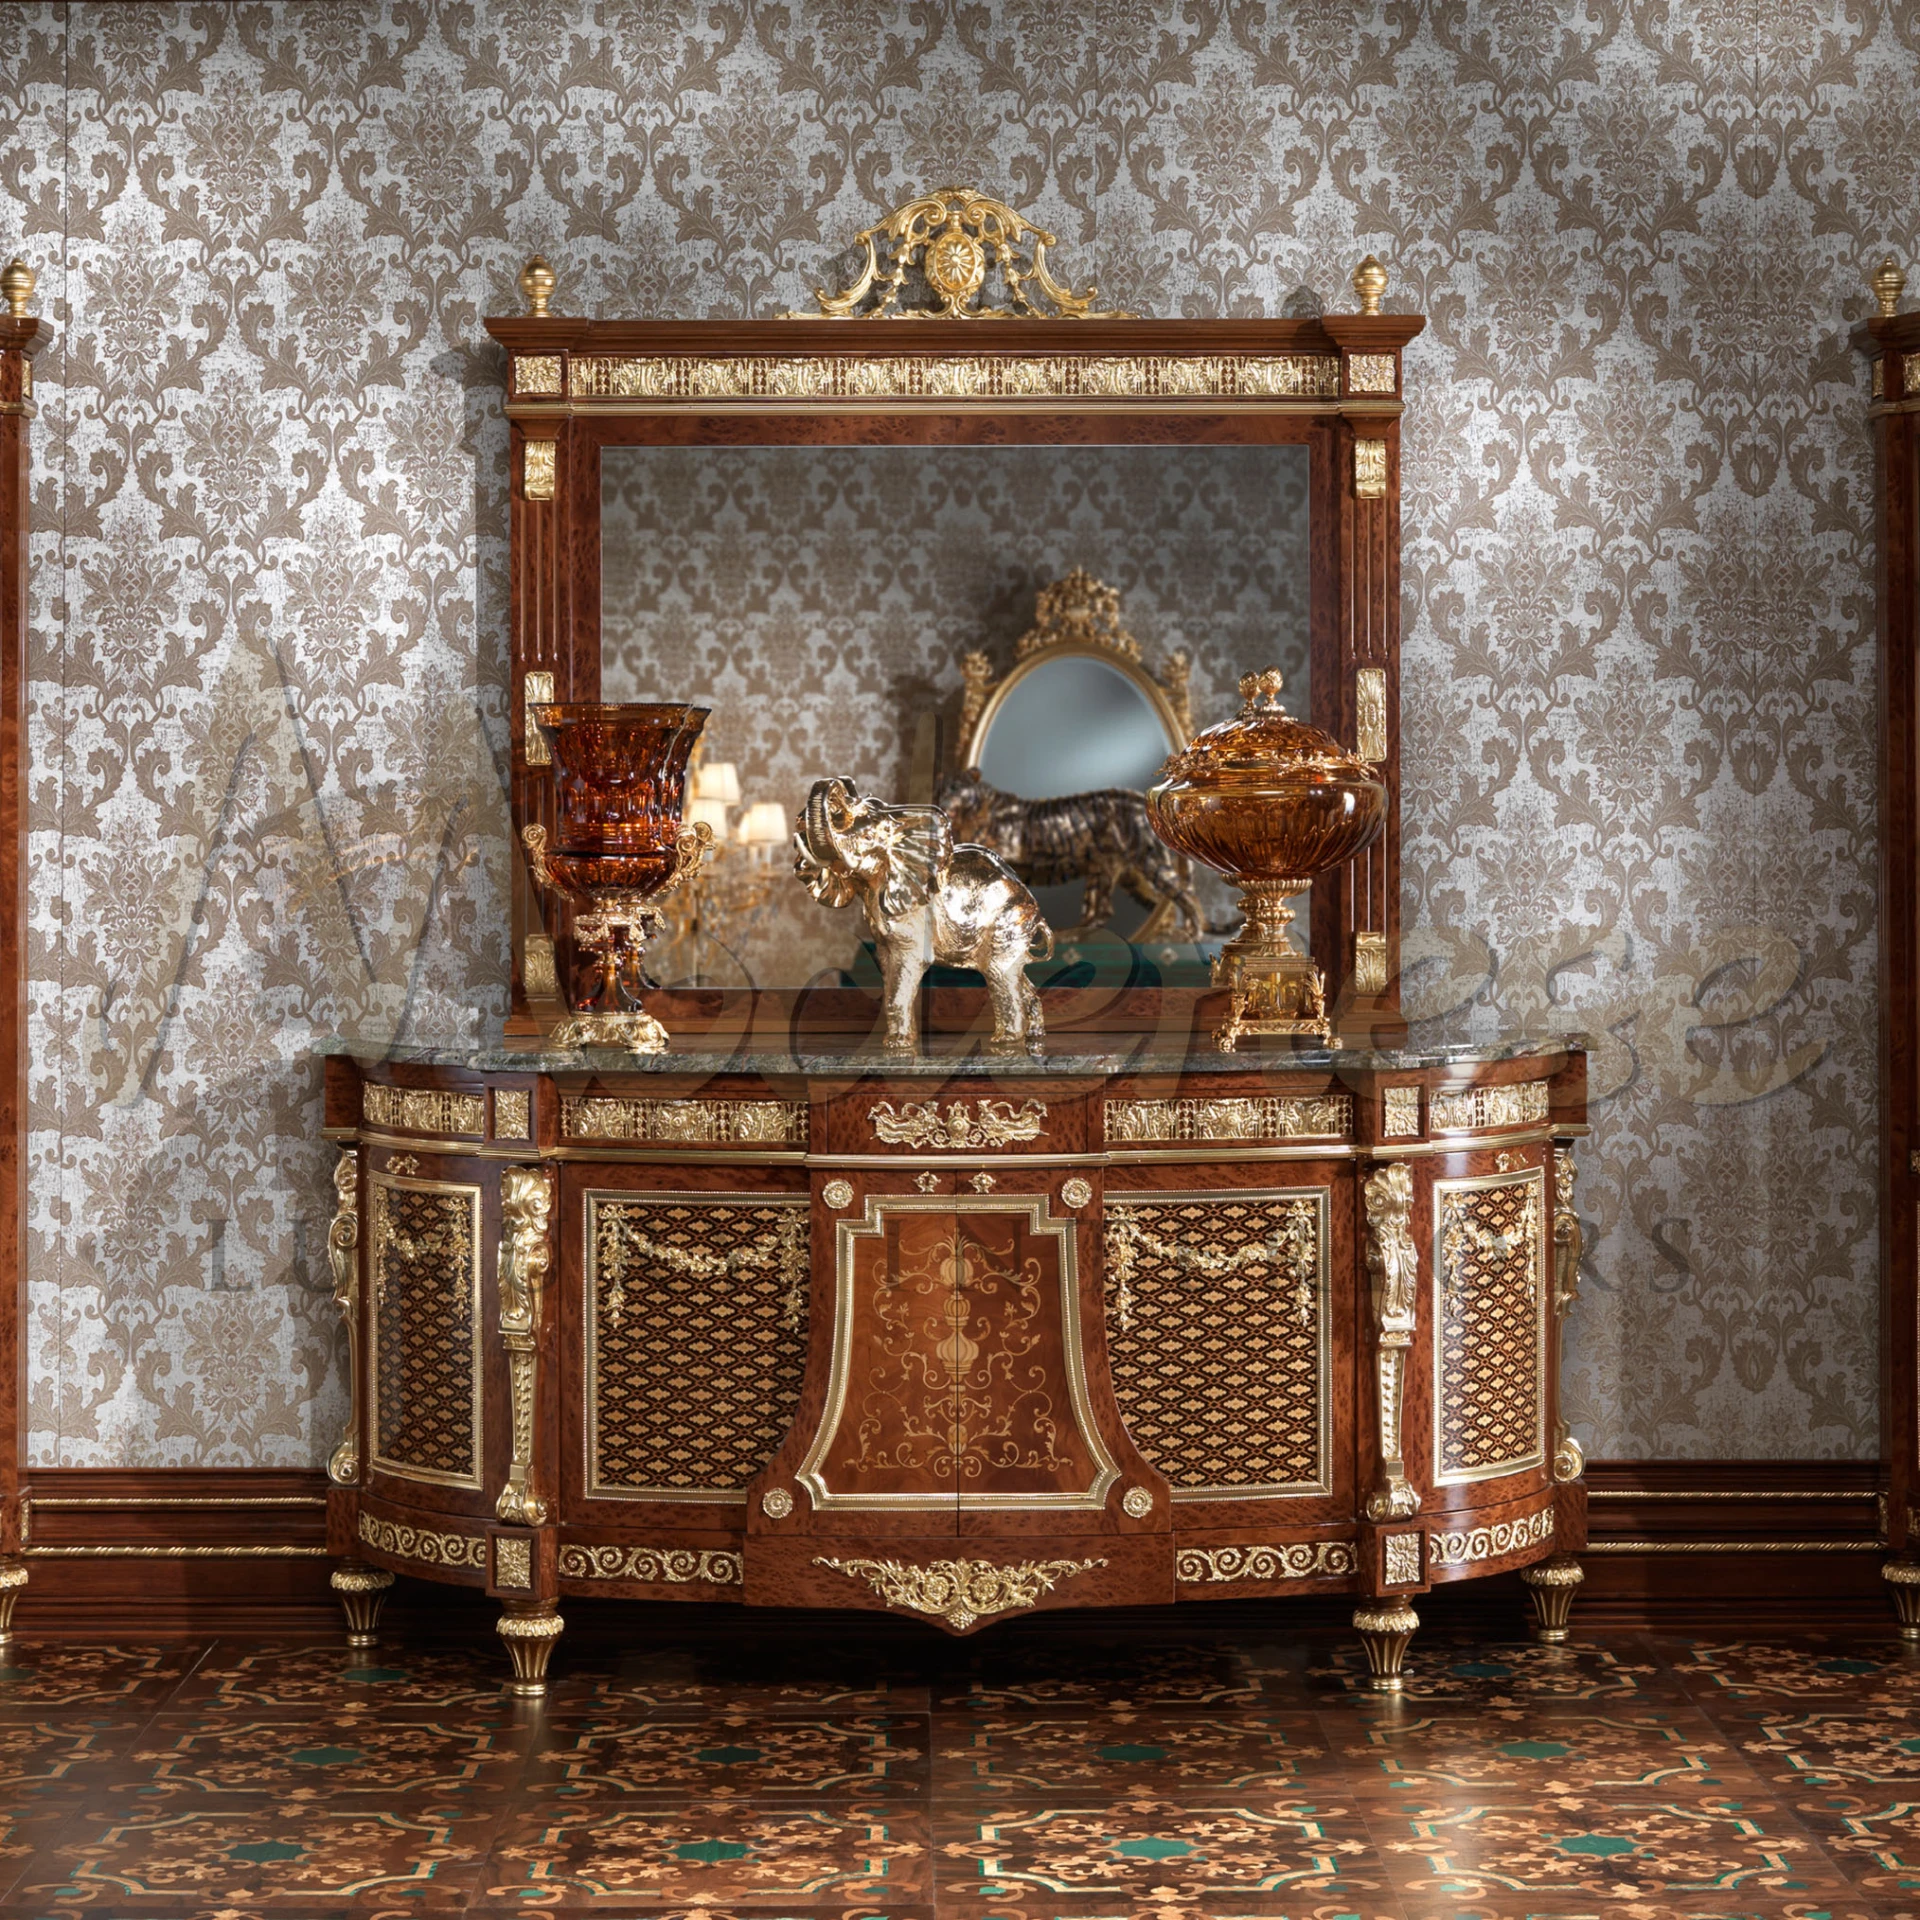 Experience your interior with our opulent Italian credenza, crafted with solid wood, briar panel, intricate inlay work, and golden motifs.